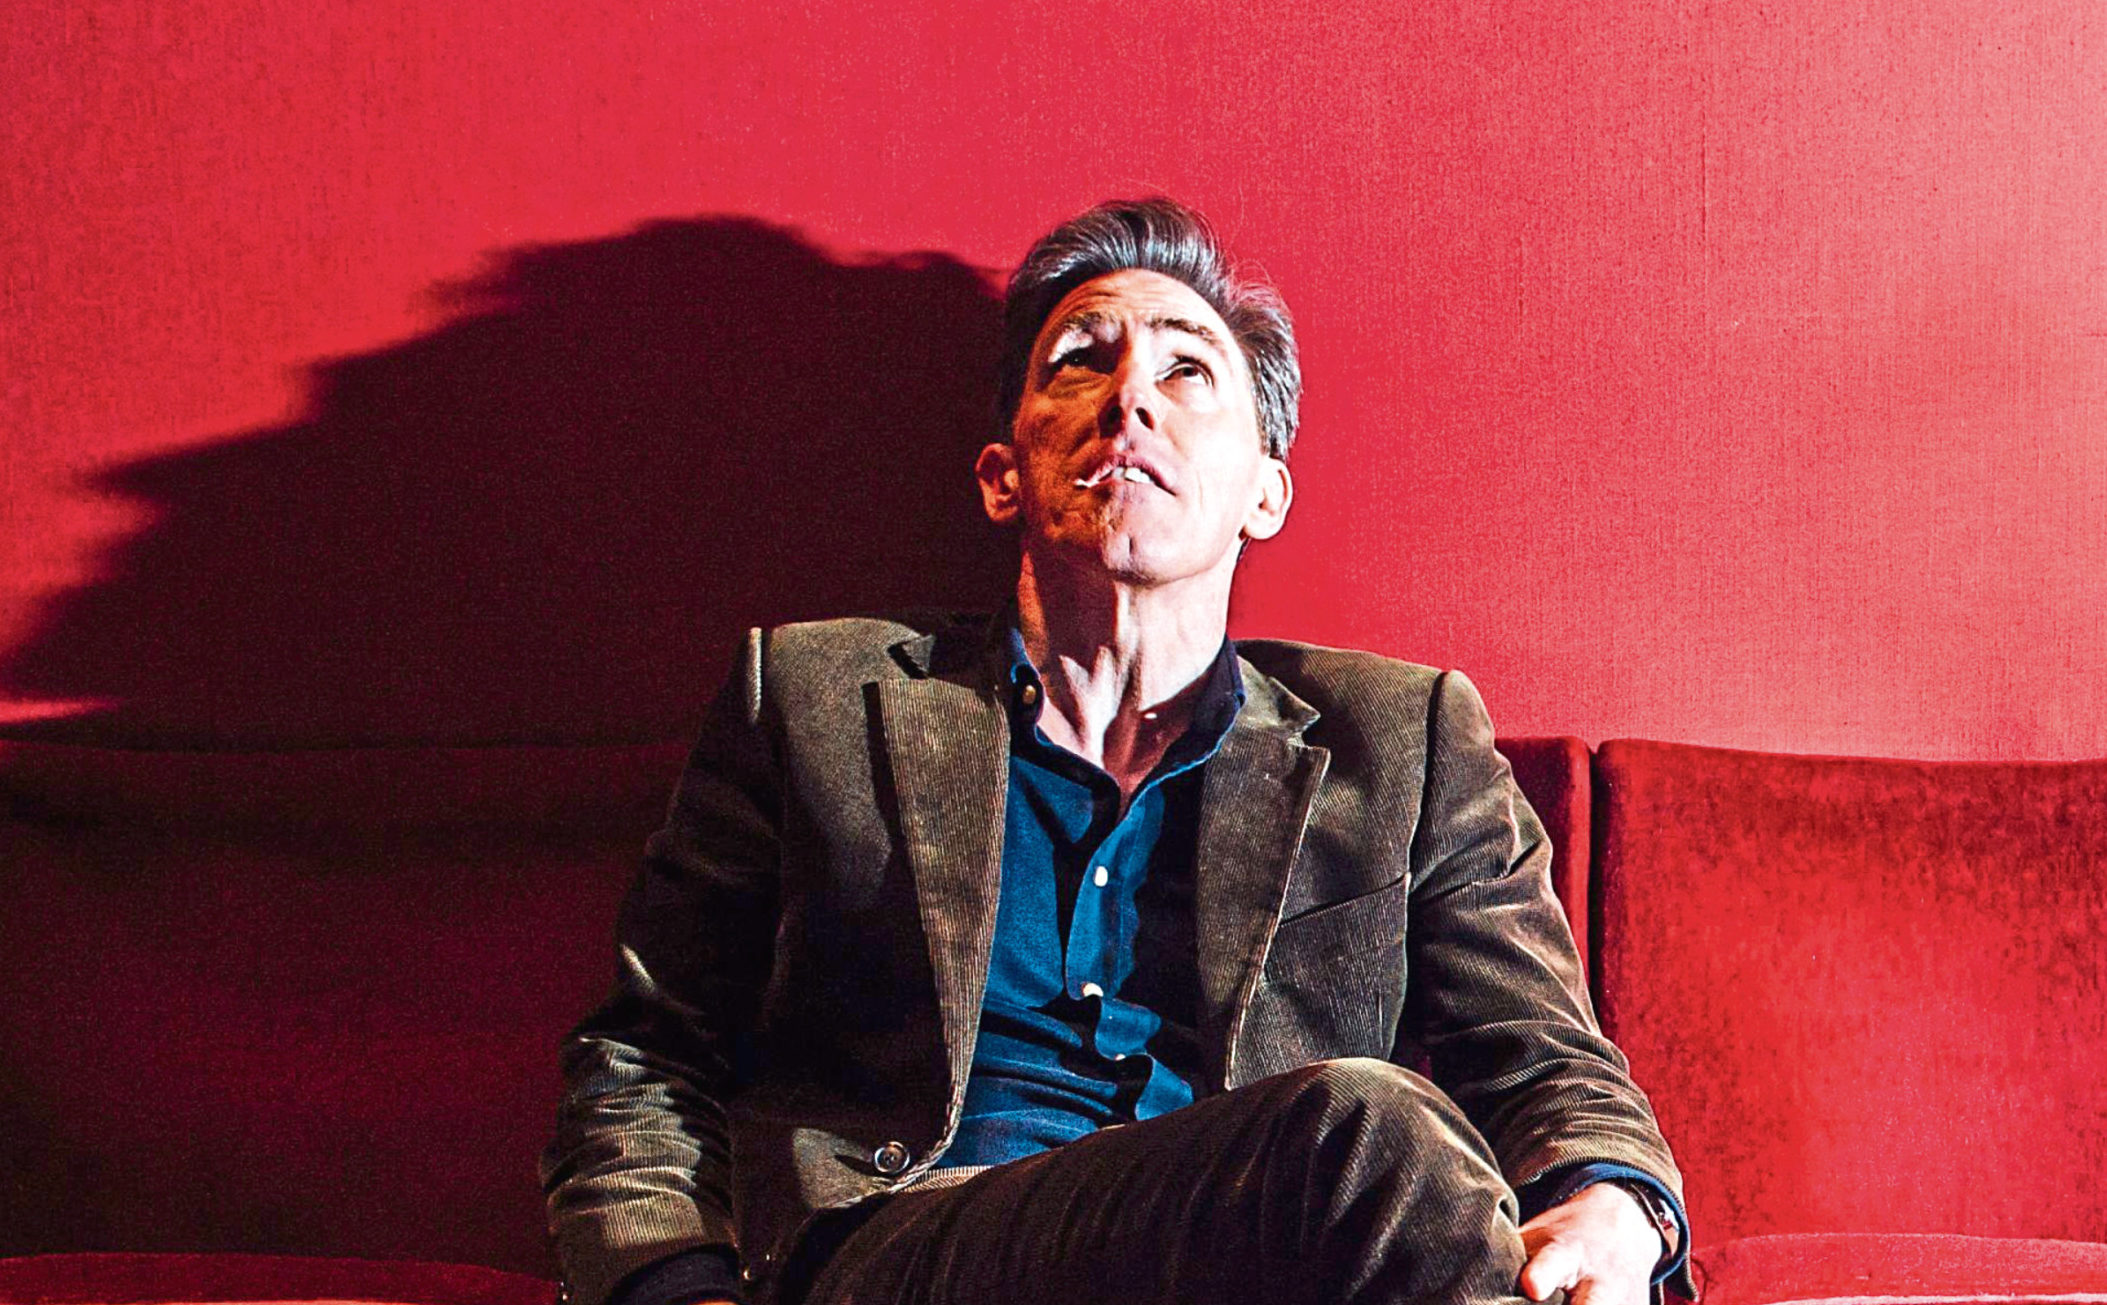 Sitting comfortably? Rob Brydon steps out of his comfort zone as he returns to stand-up